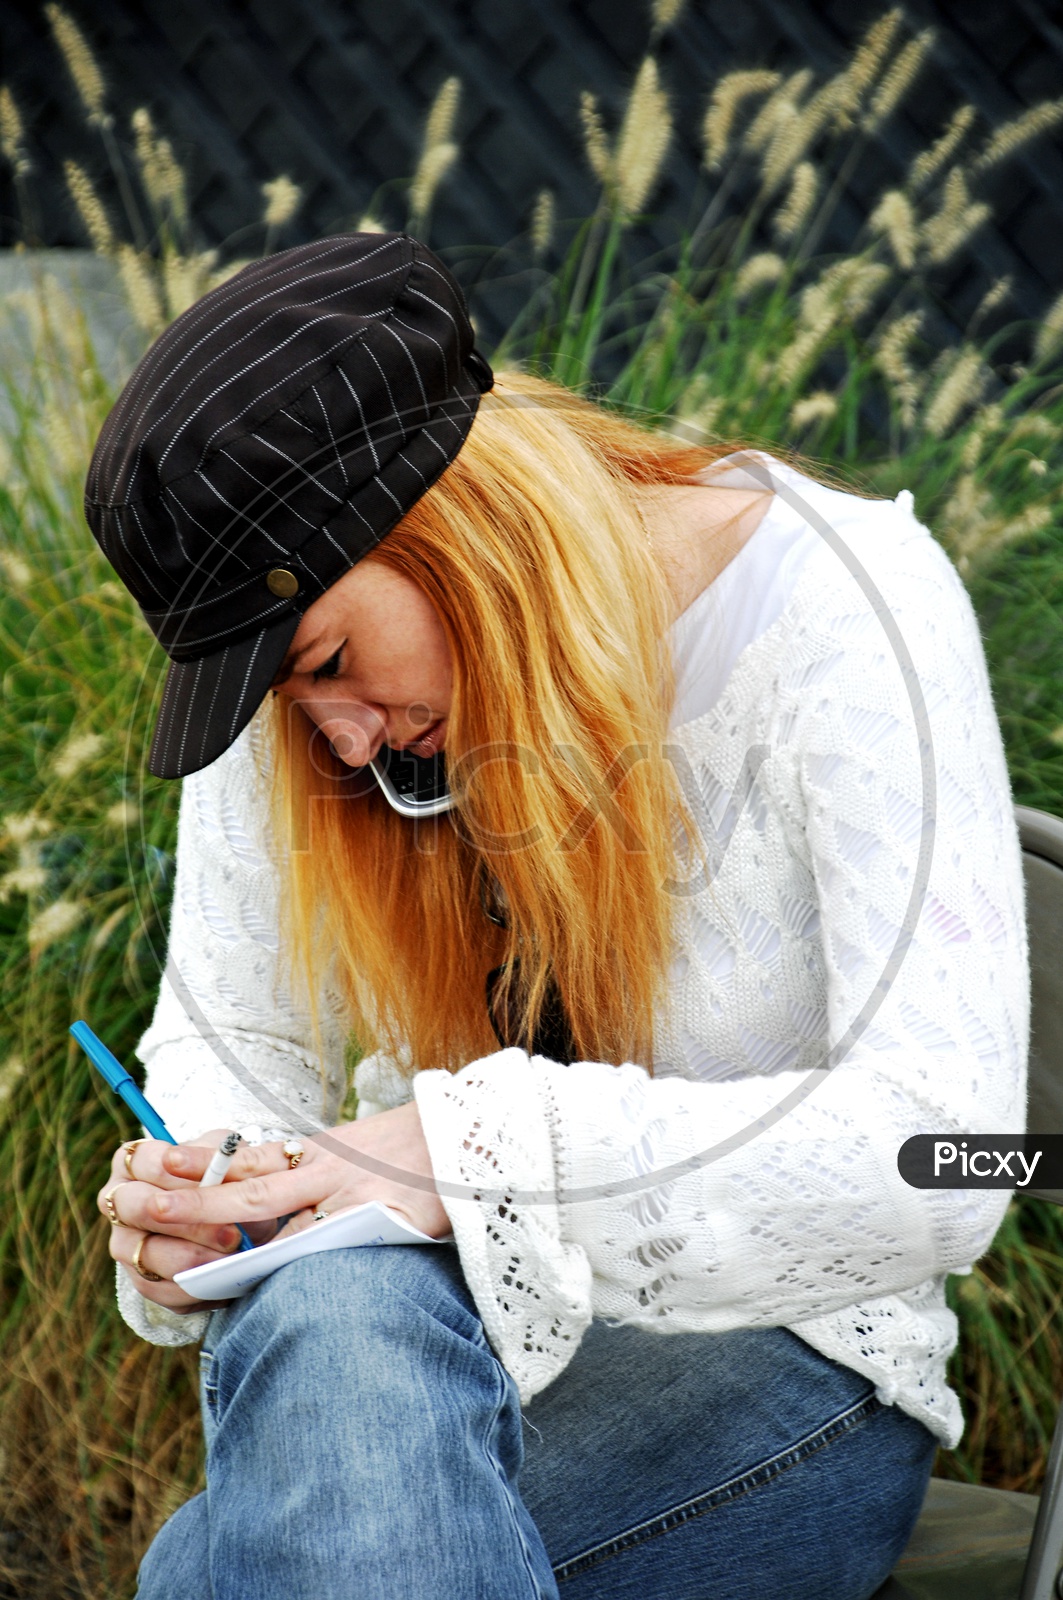 A blonde woman writing on a scribble book